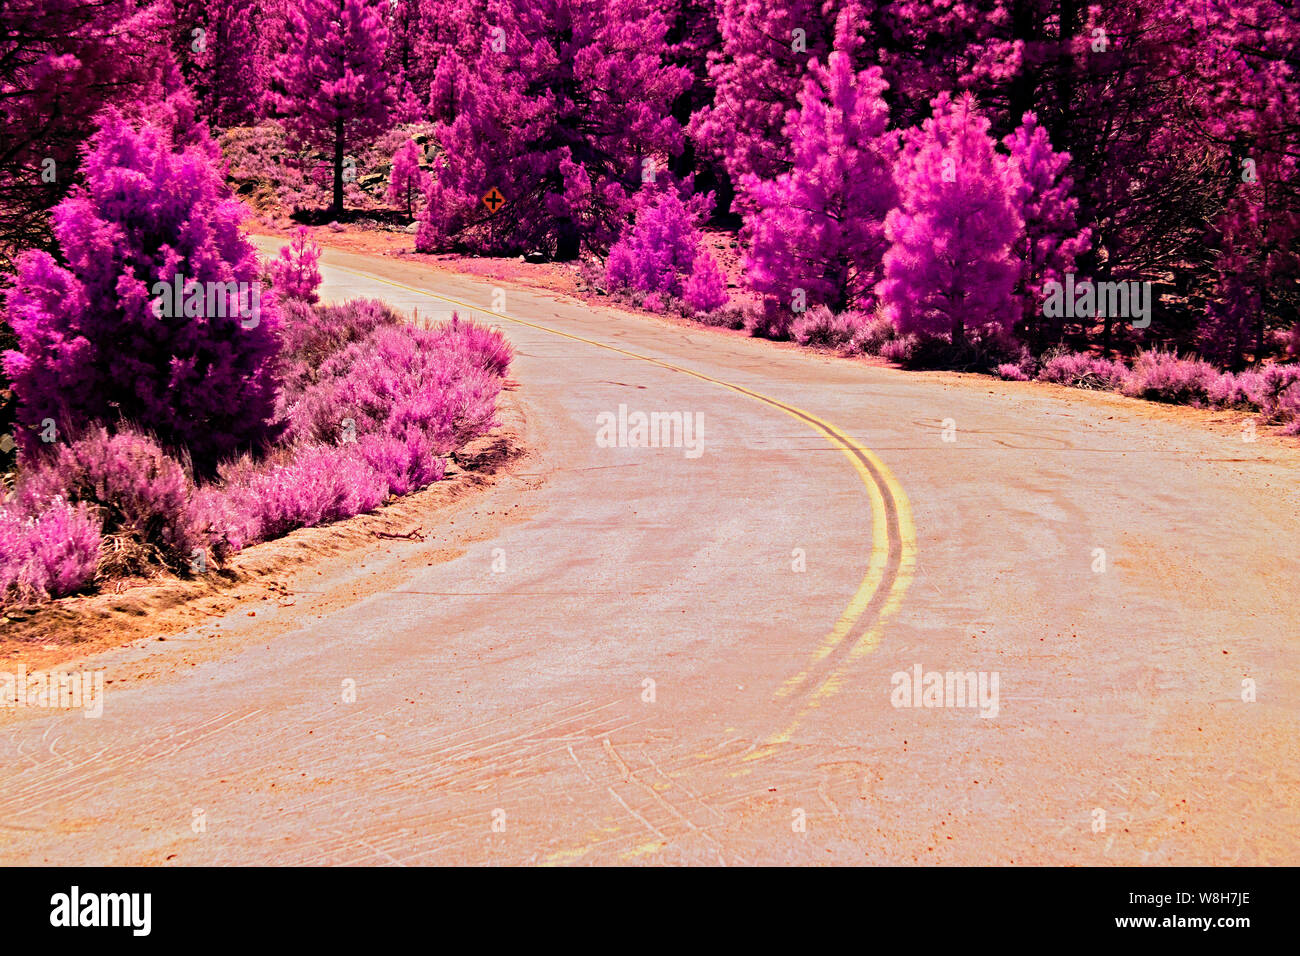 Country back road with double yellow lines curving through pink forest. Stock Photo